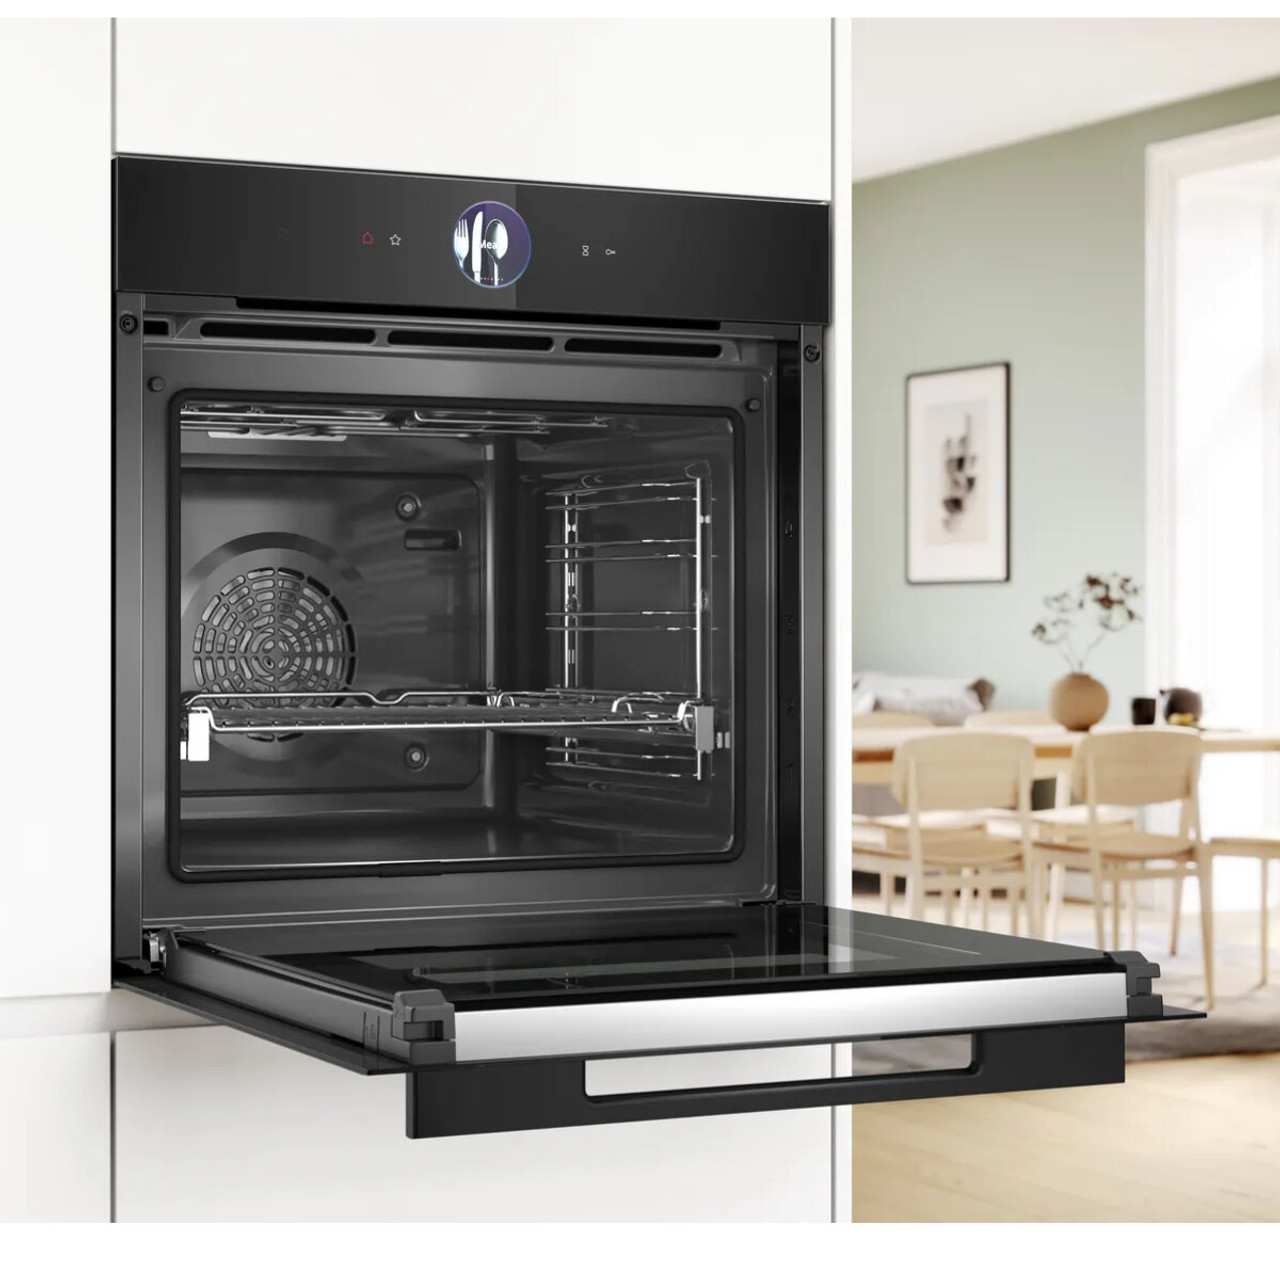 HBG976MB1A - Series 8 Accentline 60cm Built-in Multifunction Oven - Black